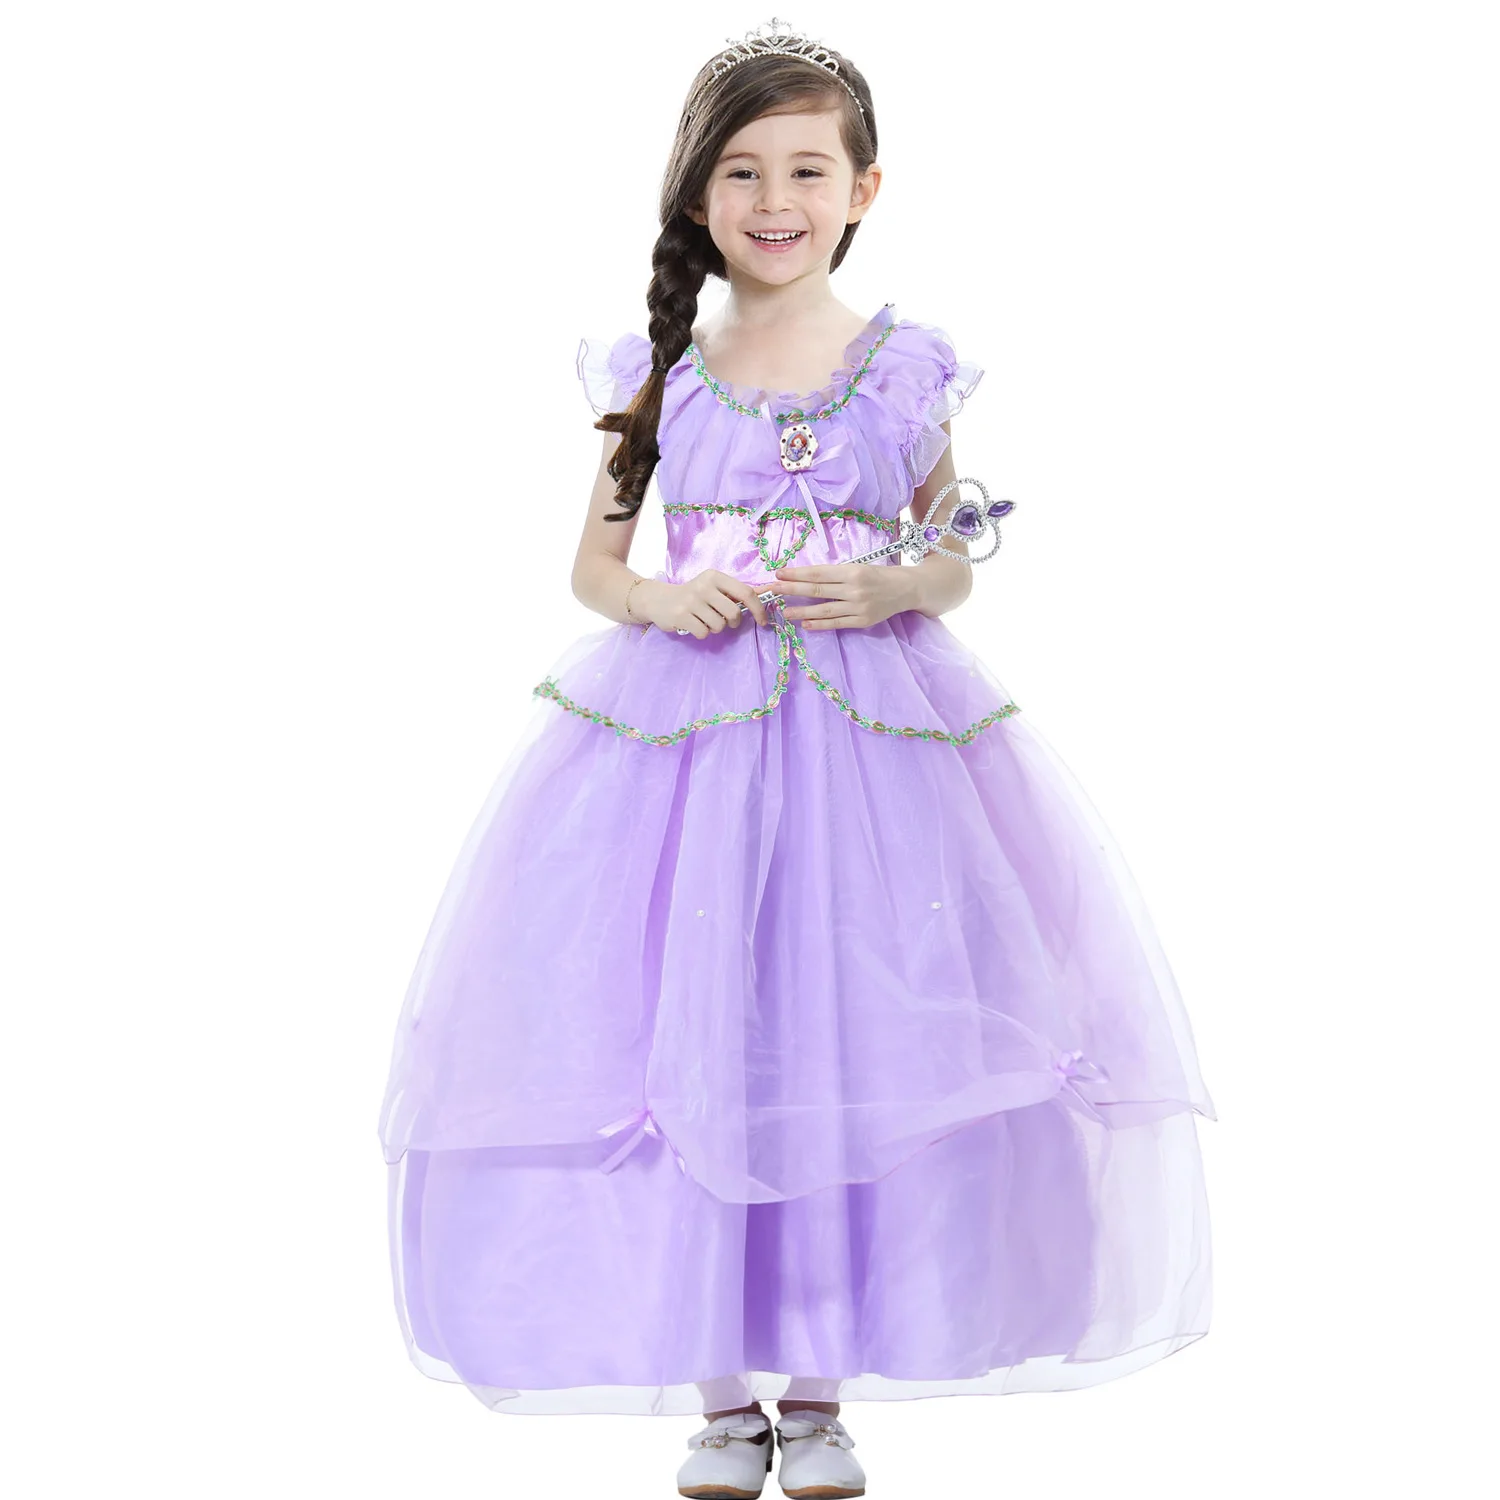 

Girls Princess Sofia Dress for Girl Kids Cosplay Costume Puff Sleeve Layerd Dresses Child Carnival Party Sophia Fancy Costumes